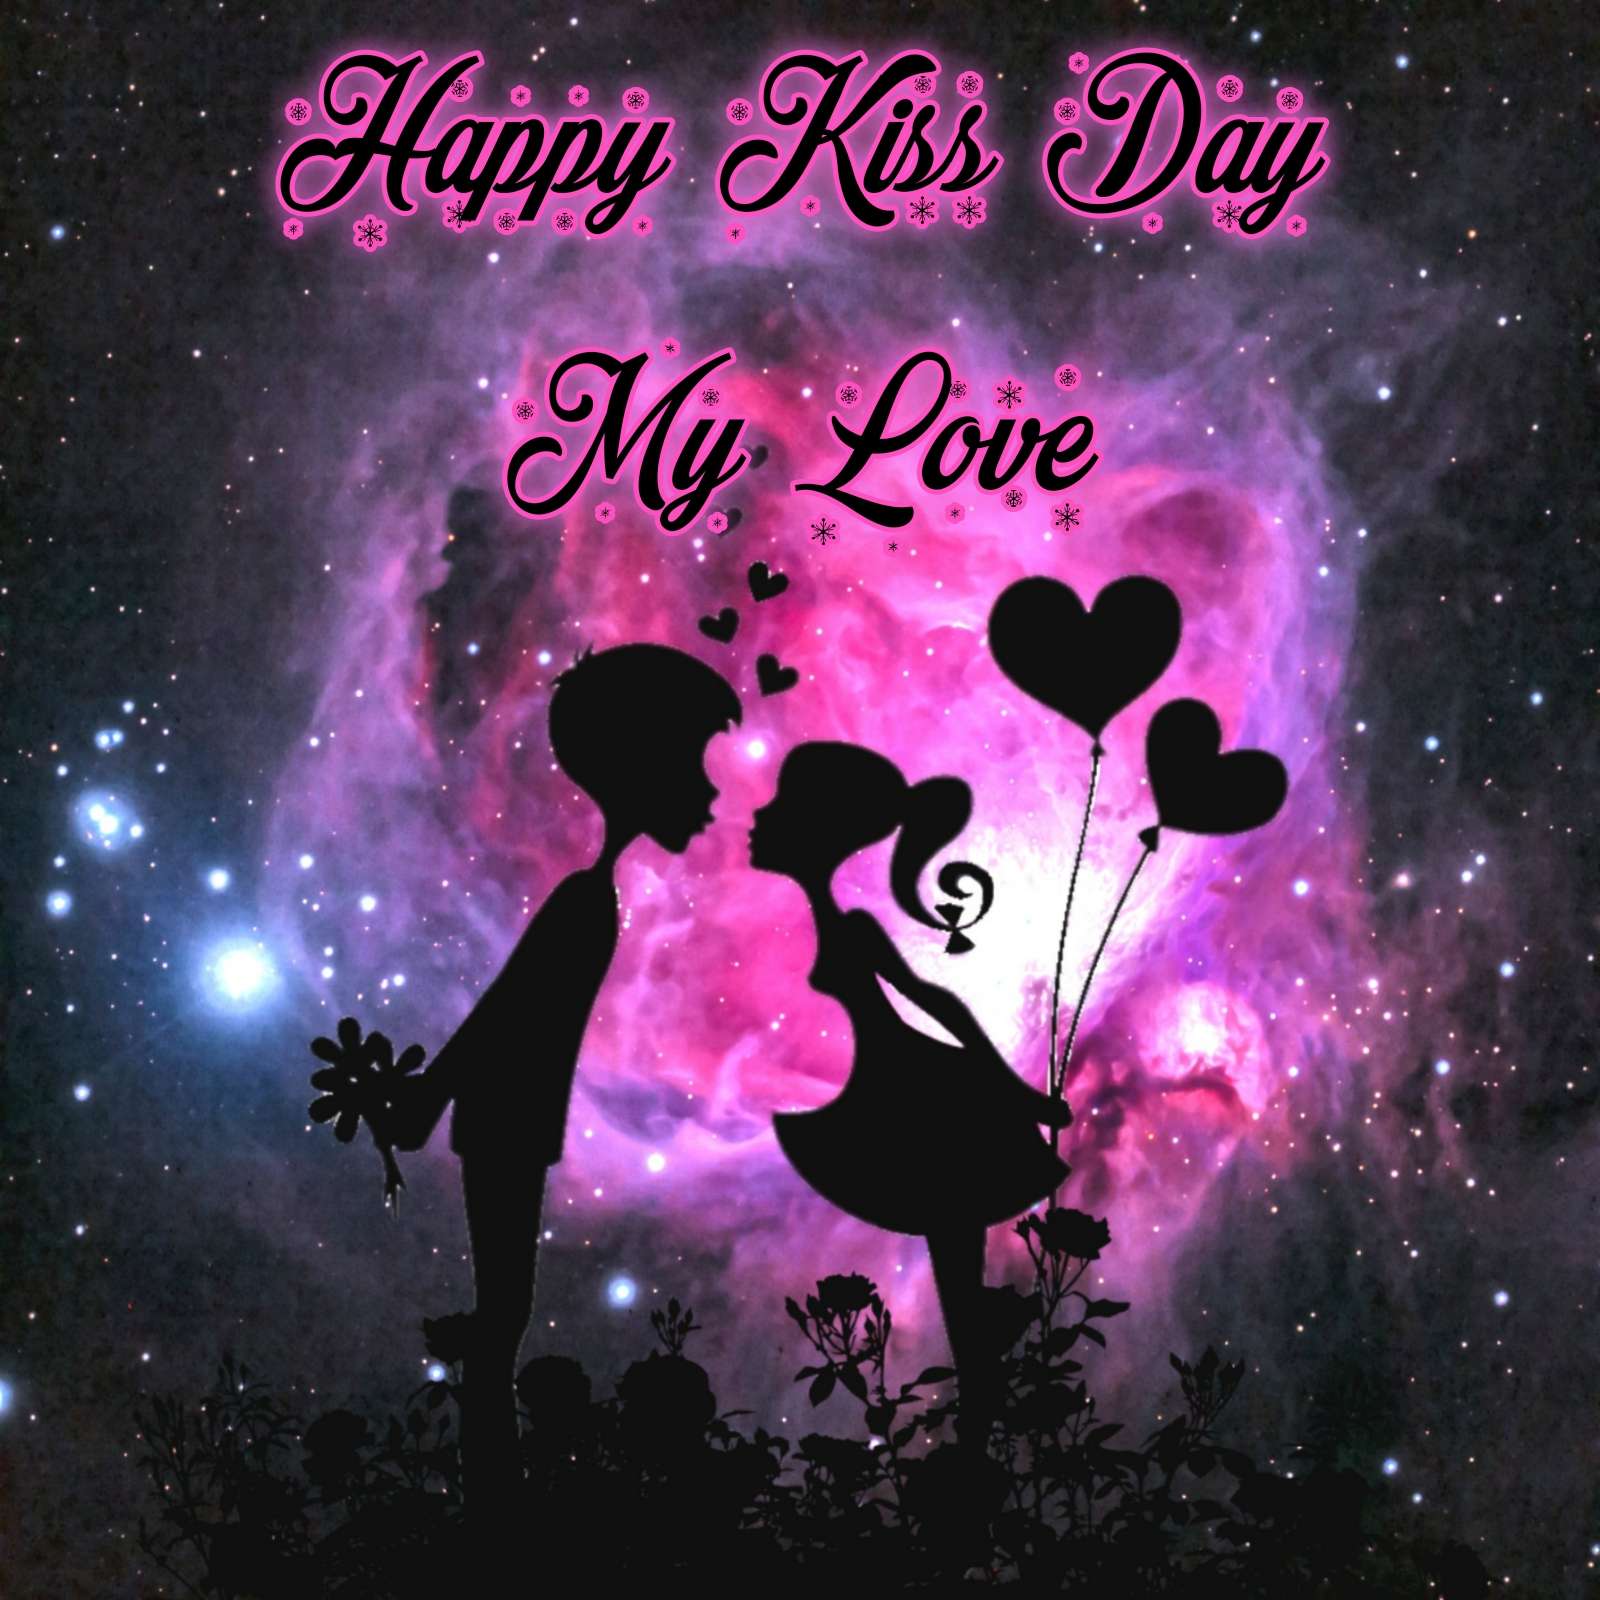 Happy Kiss Day Images for WhatsApp & Facebook DP